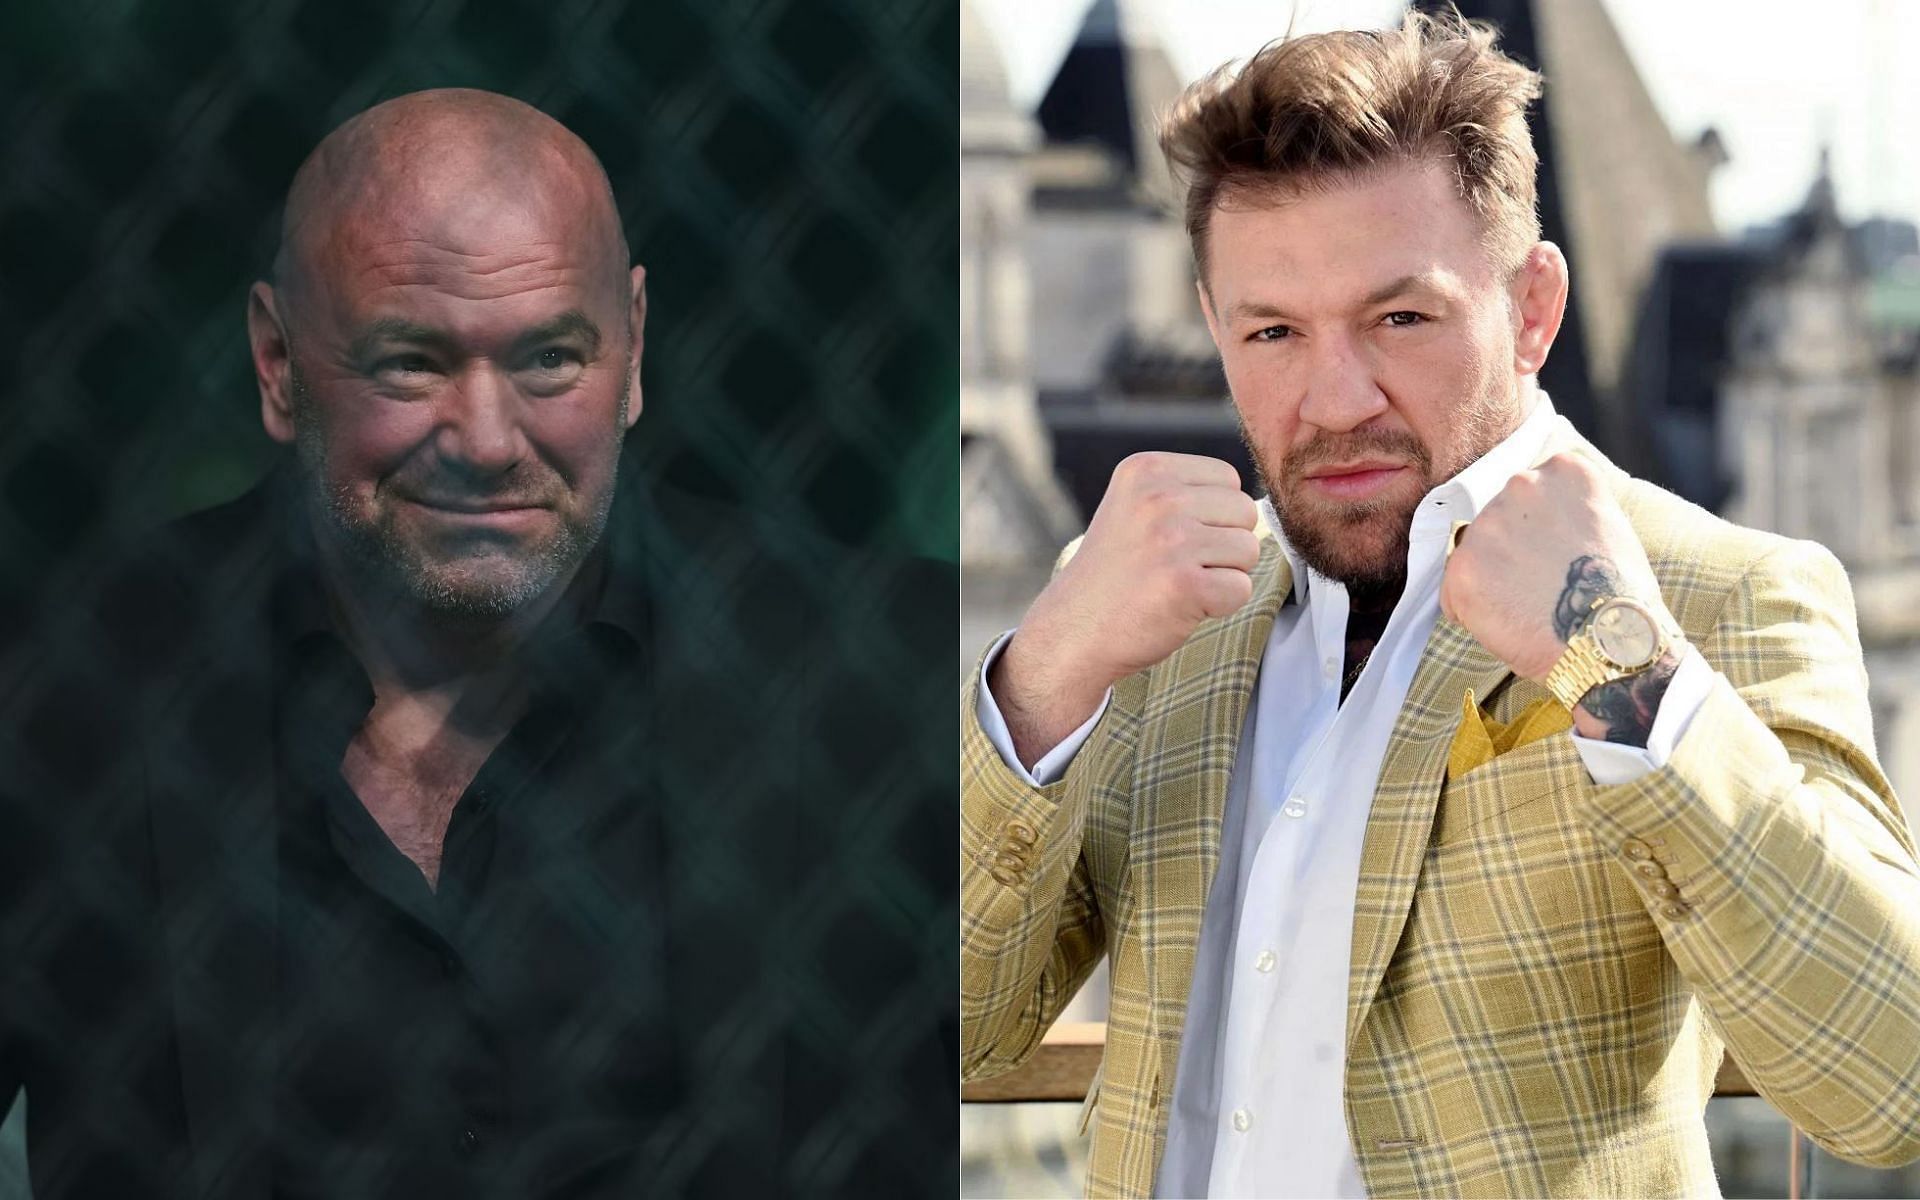 Dana White (left) gets asked about Conor McGregor